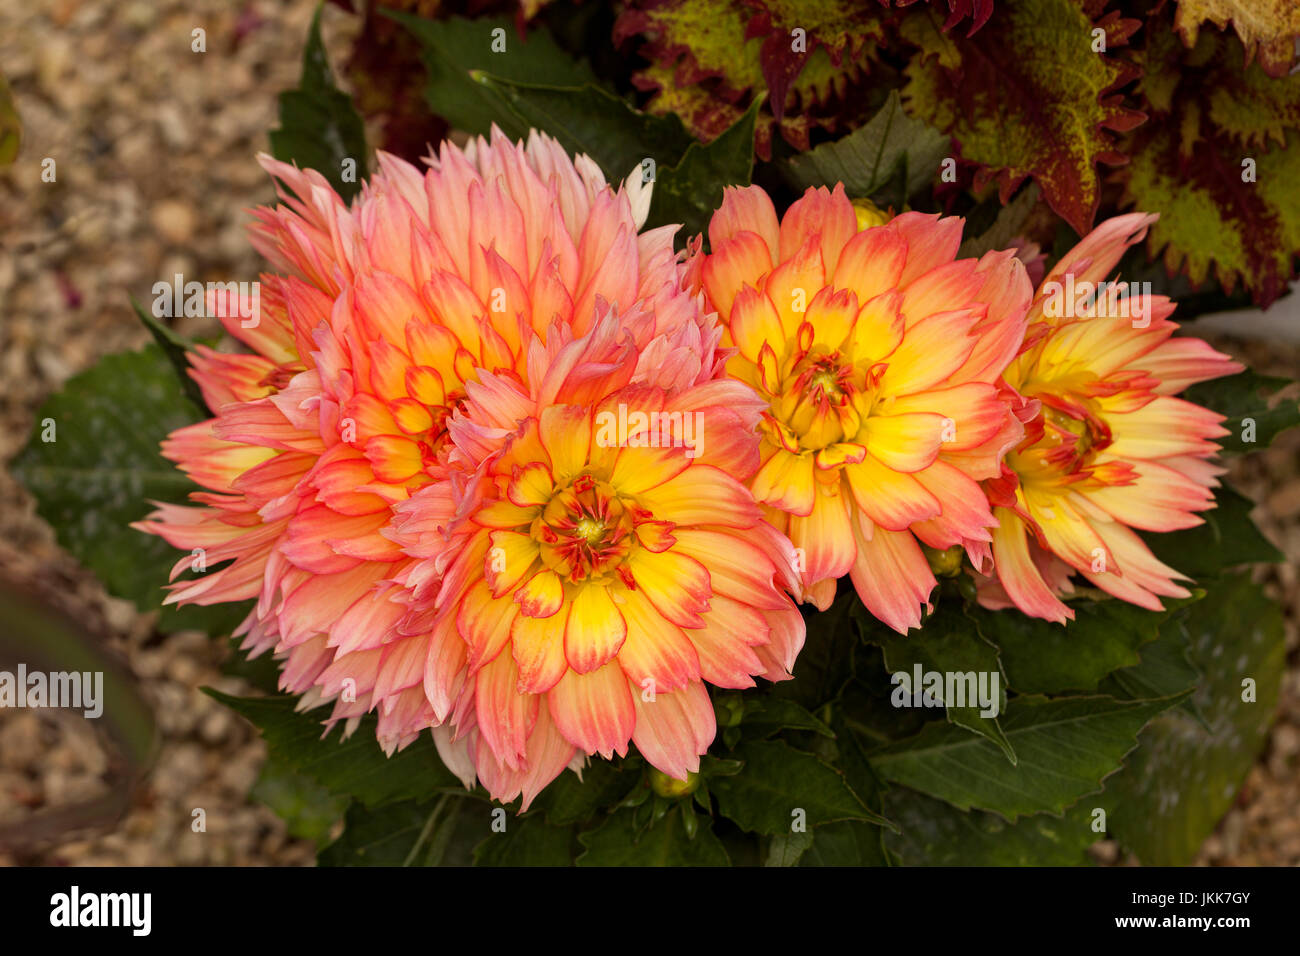 Panoramic view of cluster of vivid double apricot orange and yellow flowers of dahlia against dark background Stock Photo